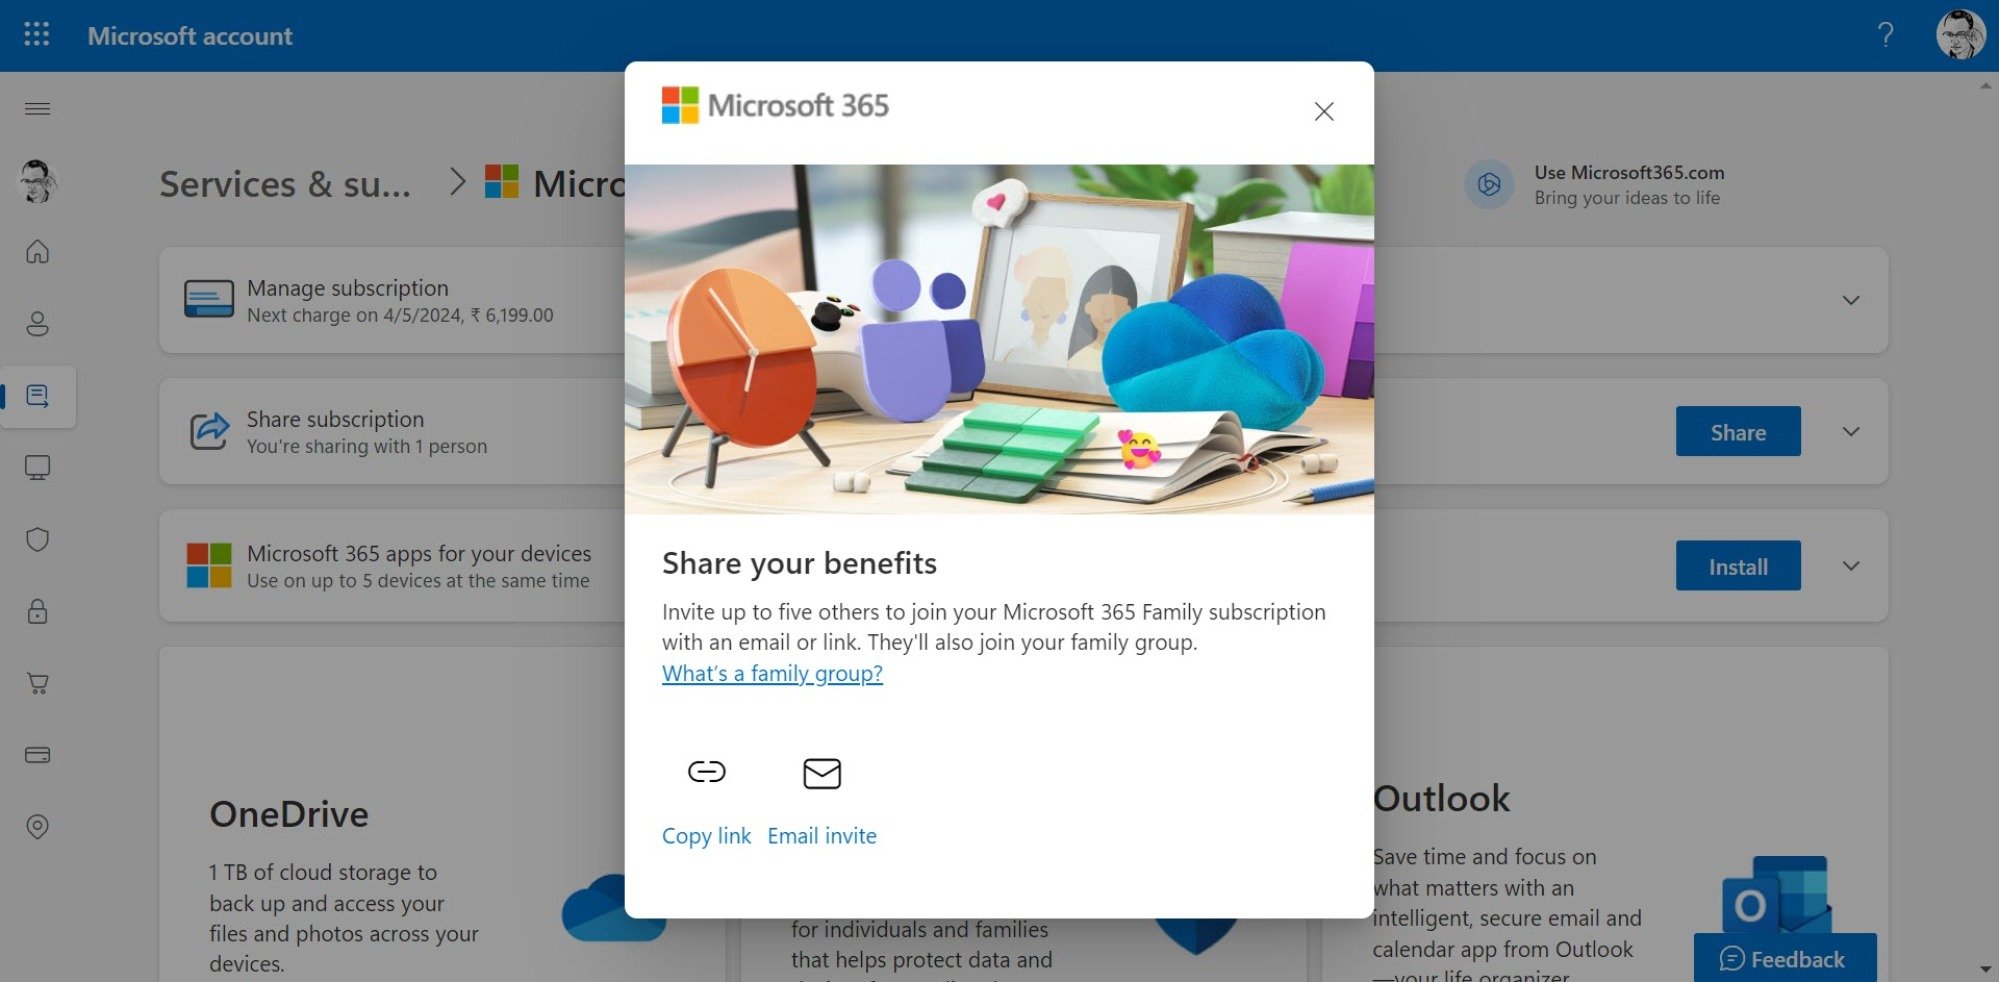 The Microsoft Services & subscriptions page with the Share button and options.